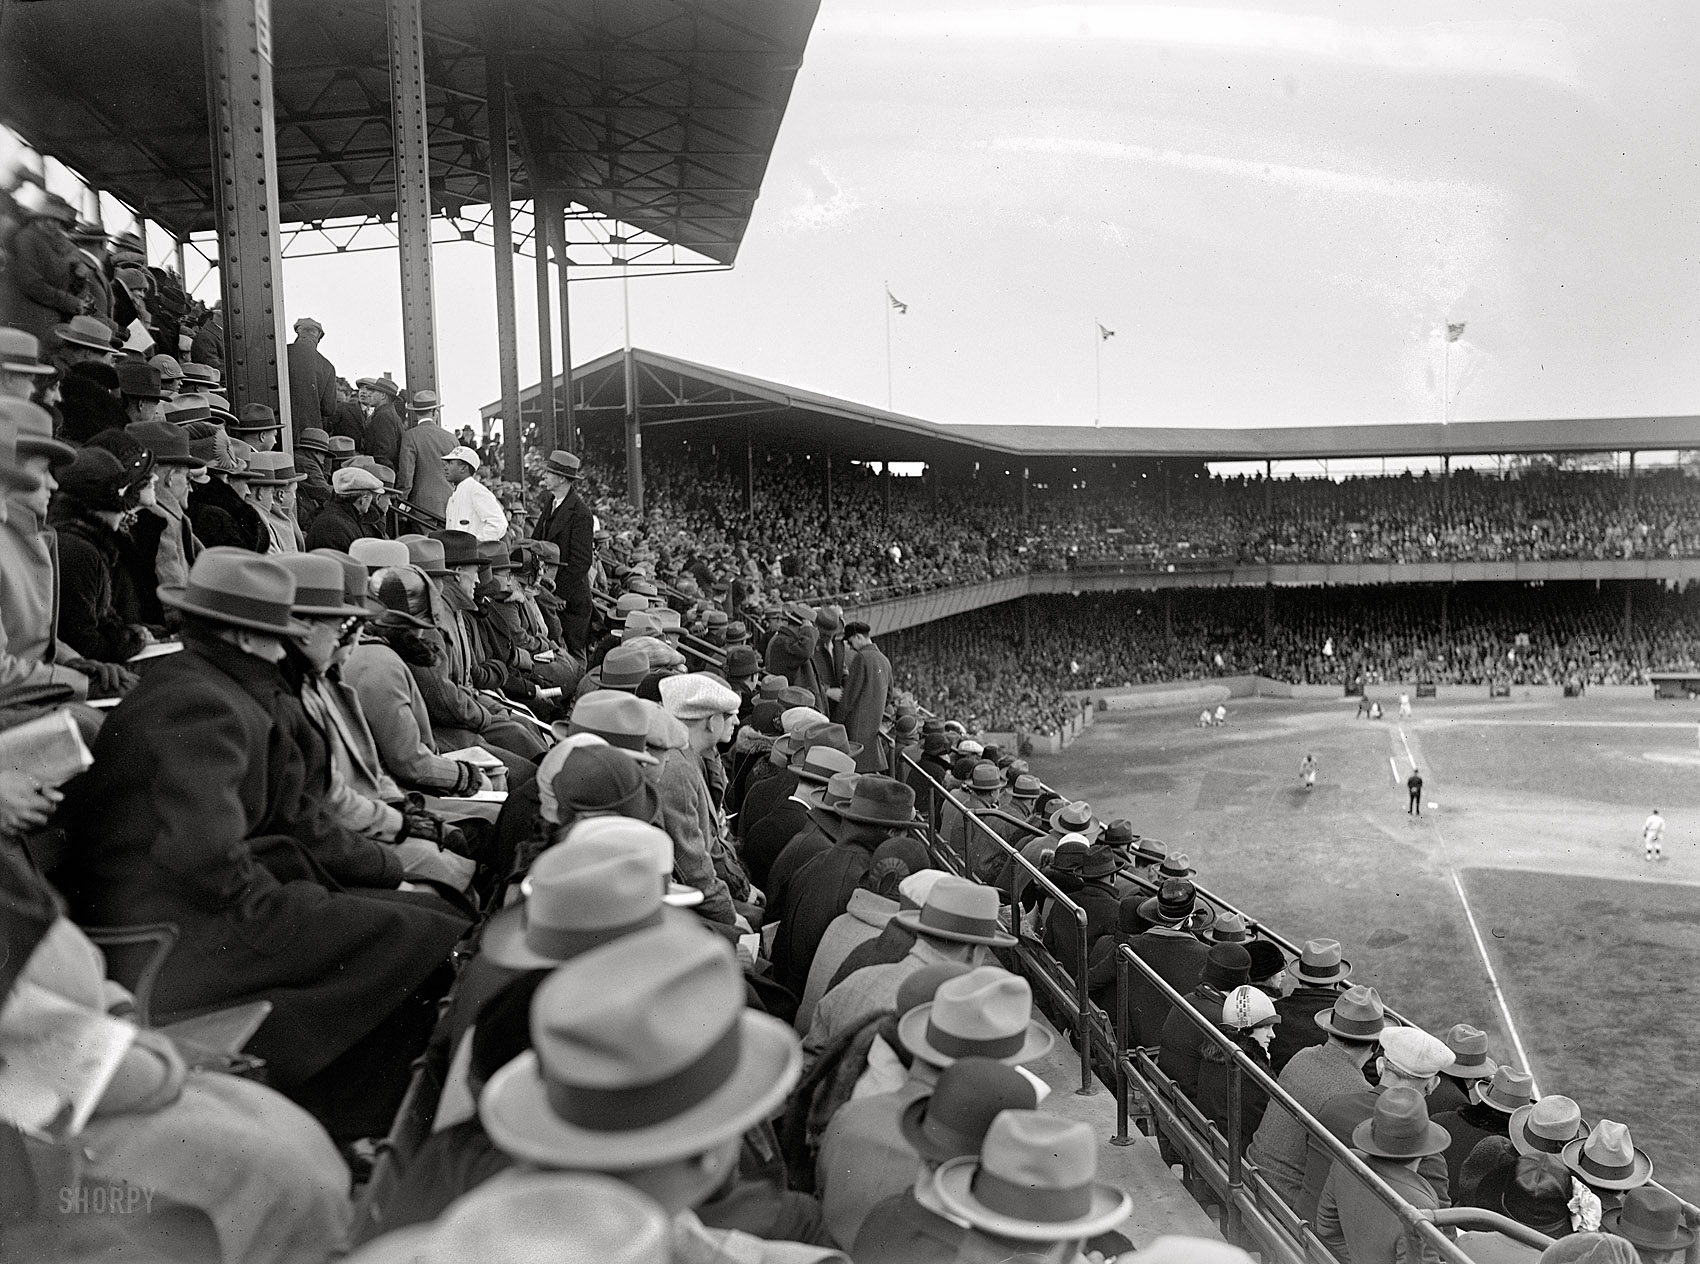 "World Series, Griffith Stadium, 1925." The headline when it was all over: PIRATES MAKE NATS WALK PLANK. National Photo Co. View full size.